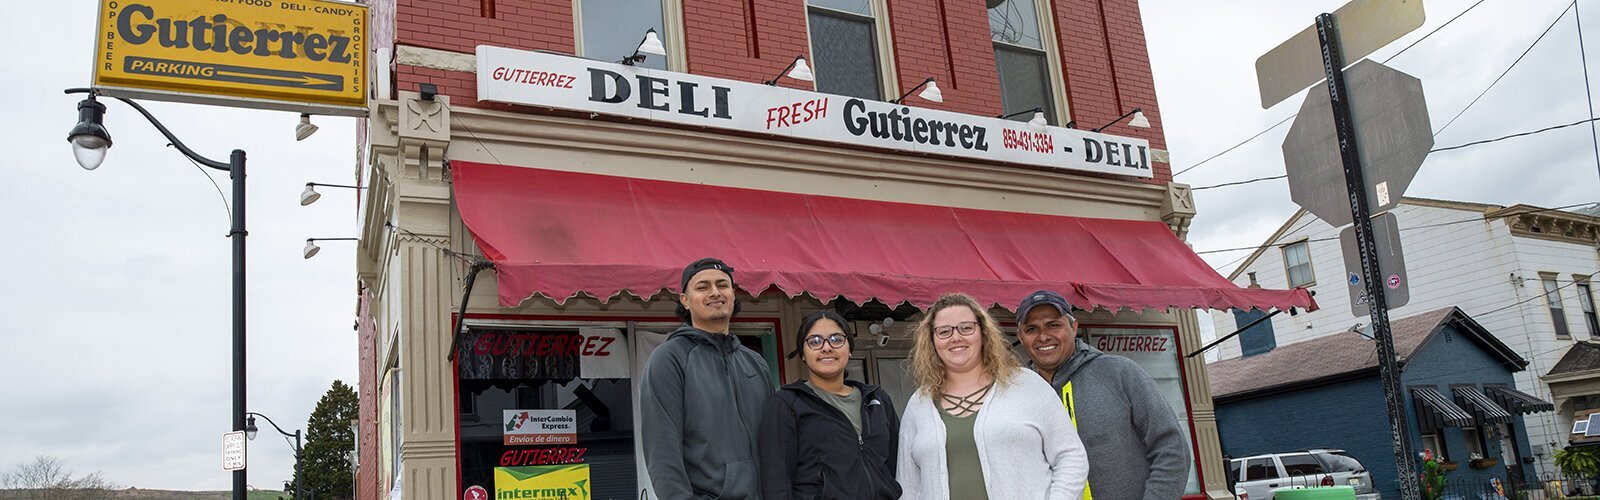 Gutierrez Deli has become a gathering place and resource for Covington's Latino residents. The Gutierrez family: Sergio, Evelyn, Courtney Case, and Claudio.